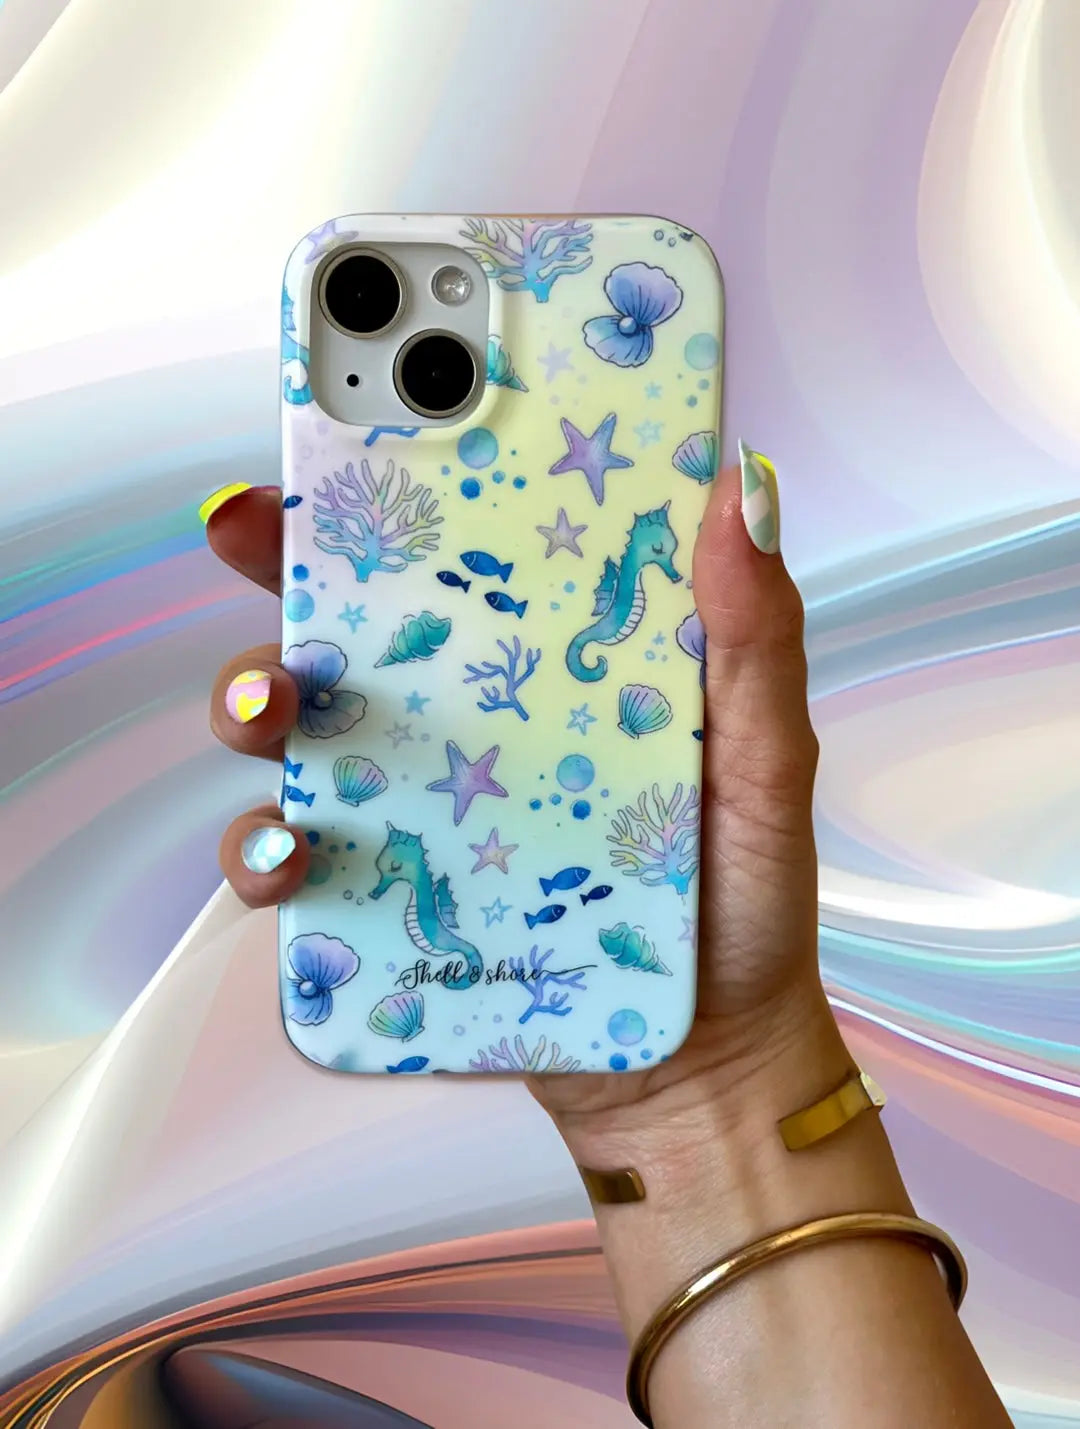 Marine Treasures iPhone Case Shell And Shore